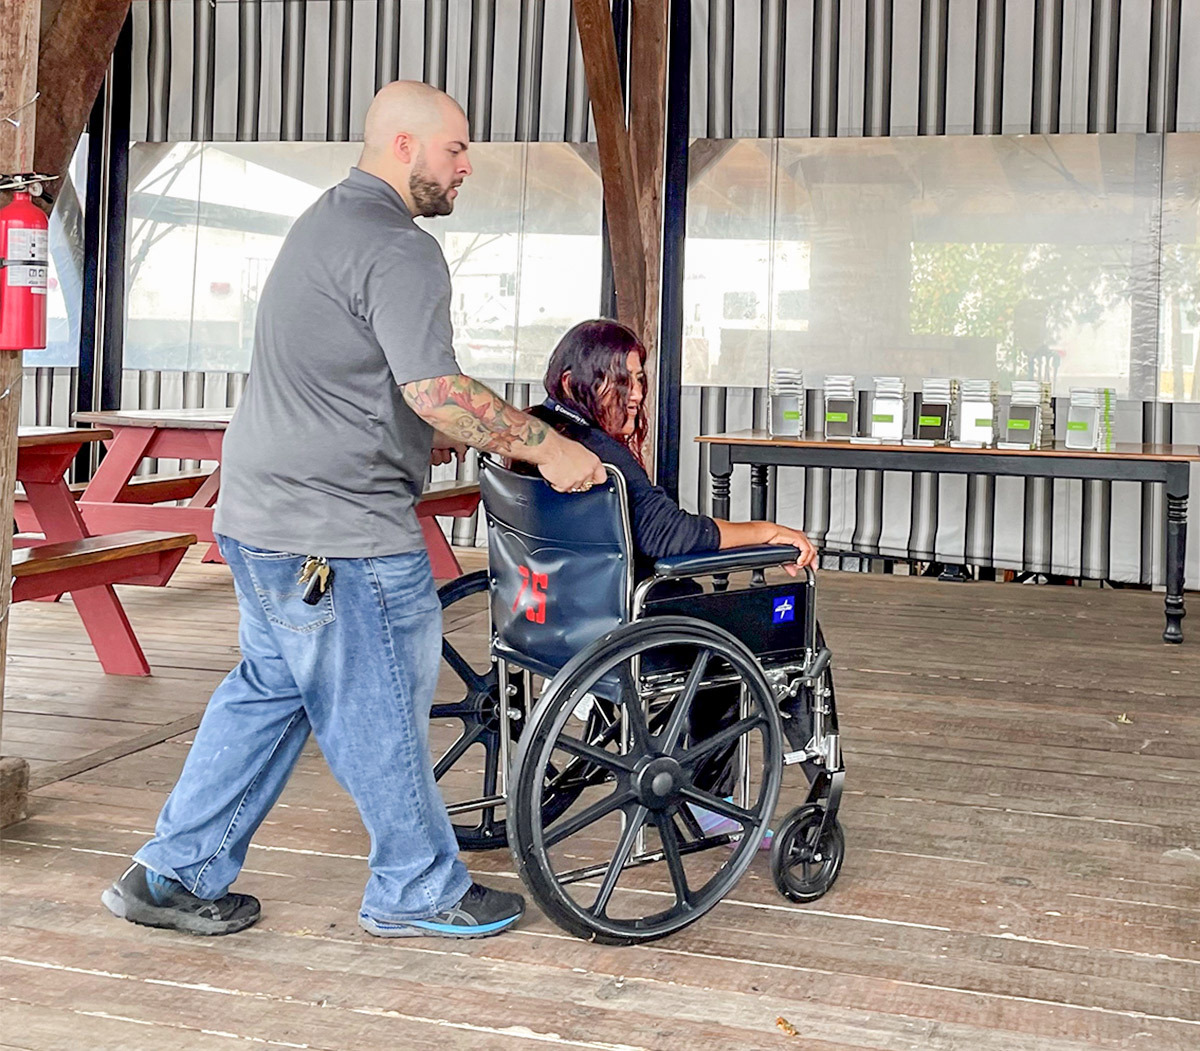 photo of a man pushing a woman in a wheelchair.